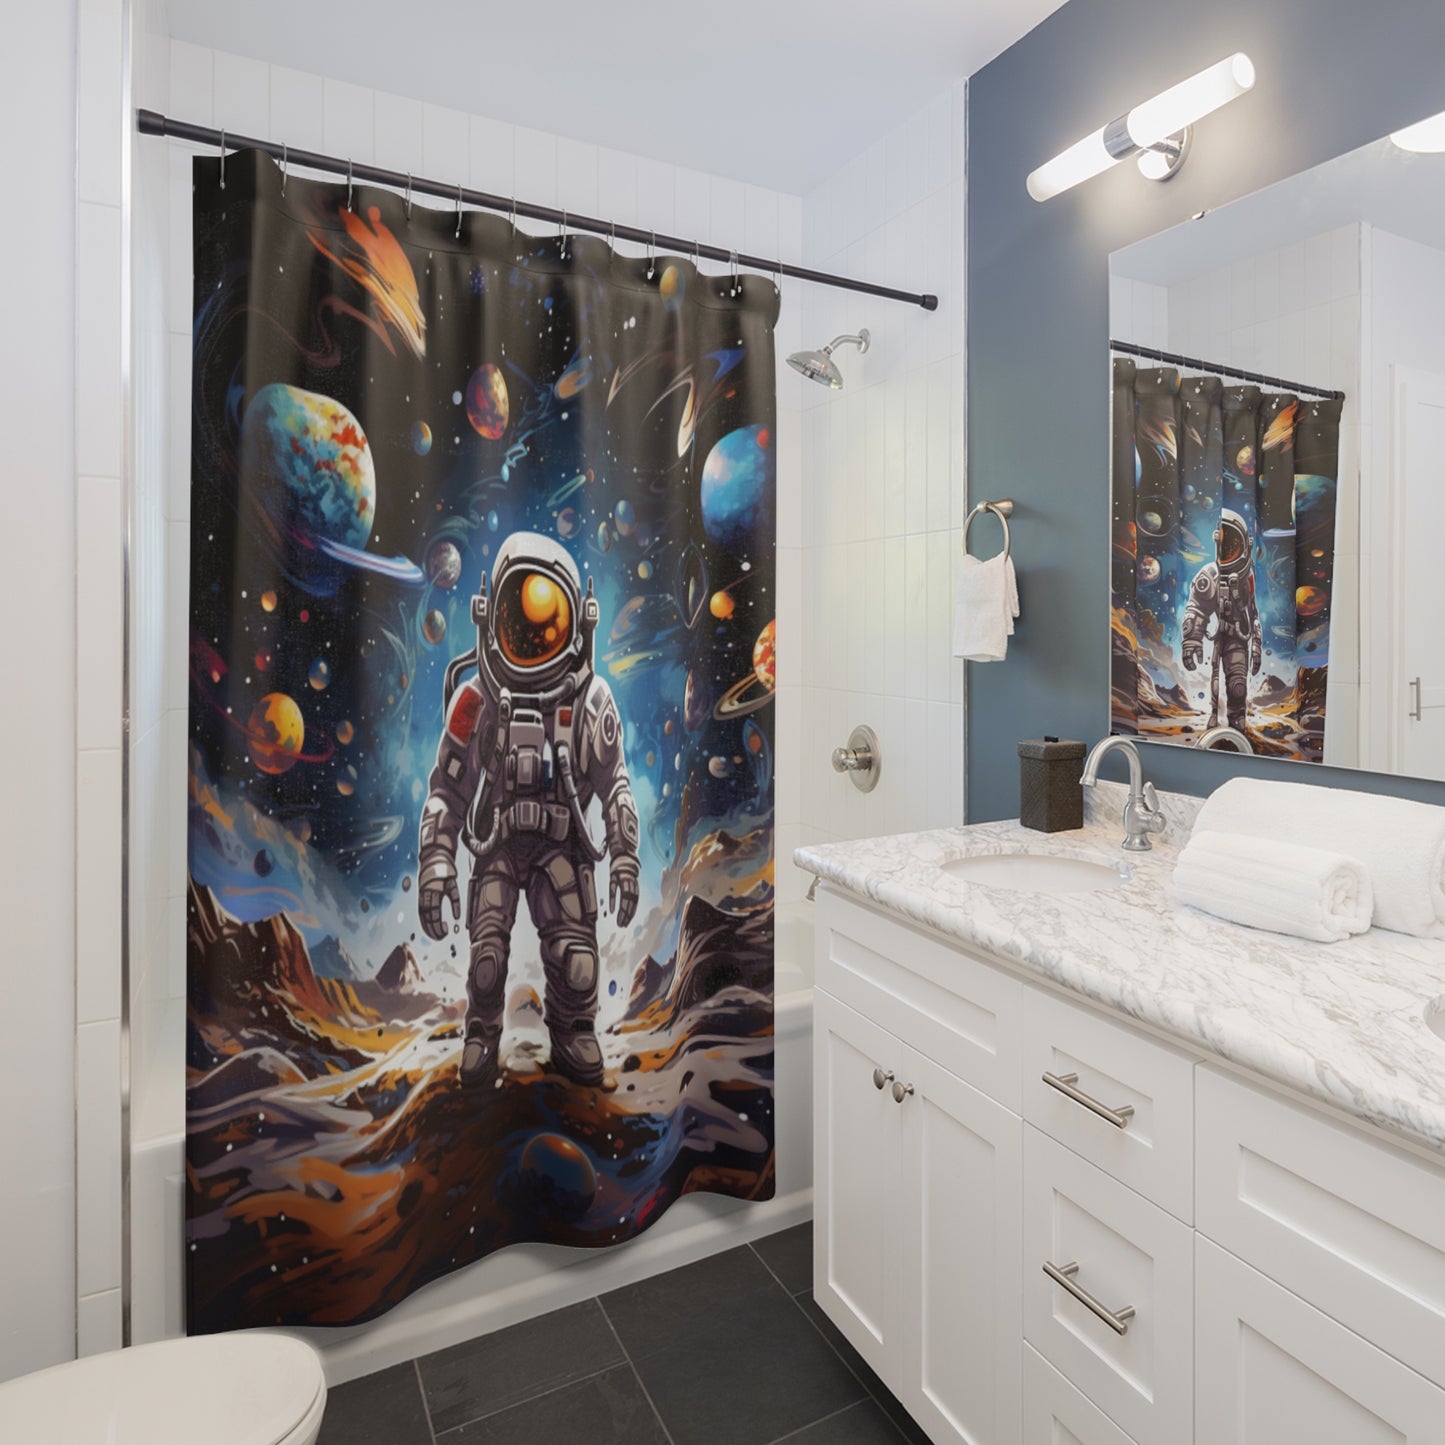 Galactic Voyage: Astronaut Journey in Celestial Star Cosmic Exploration - Shower Curtains